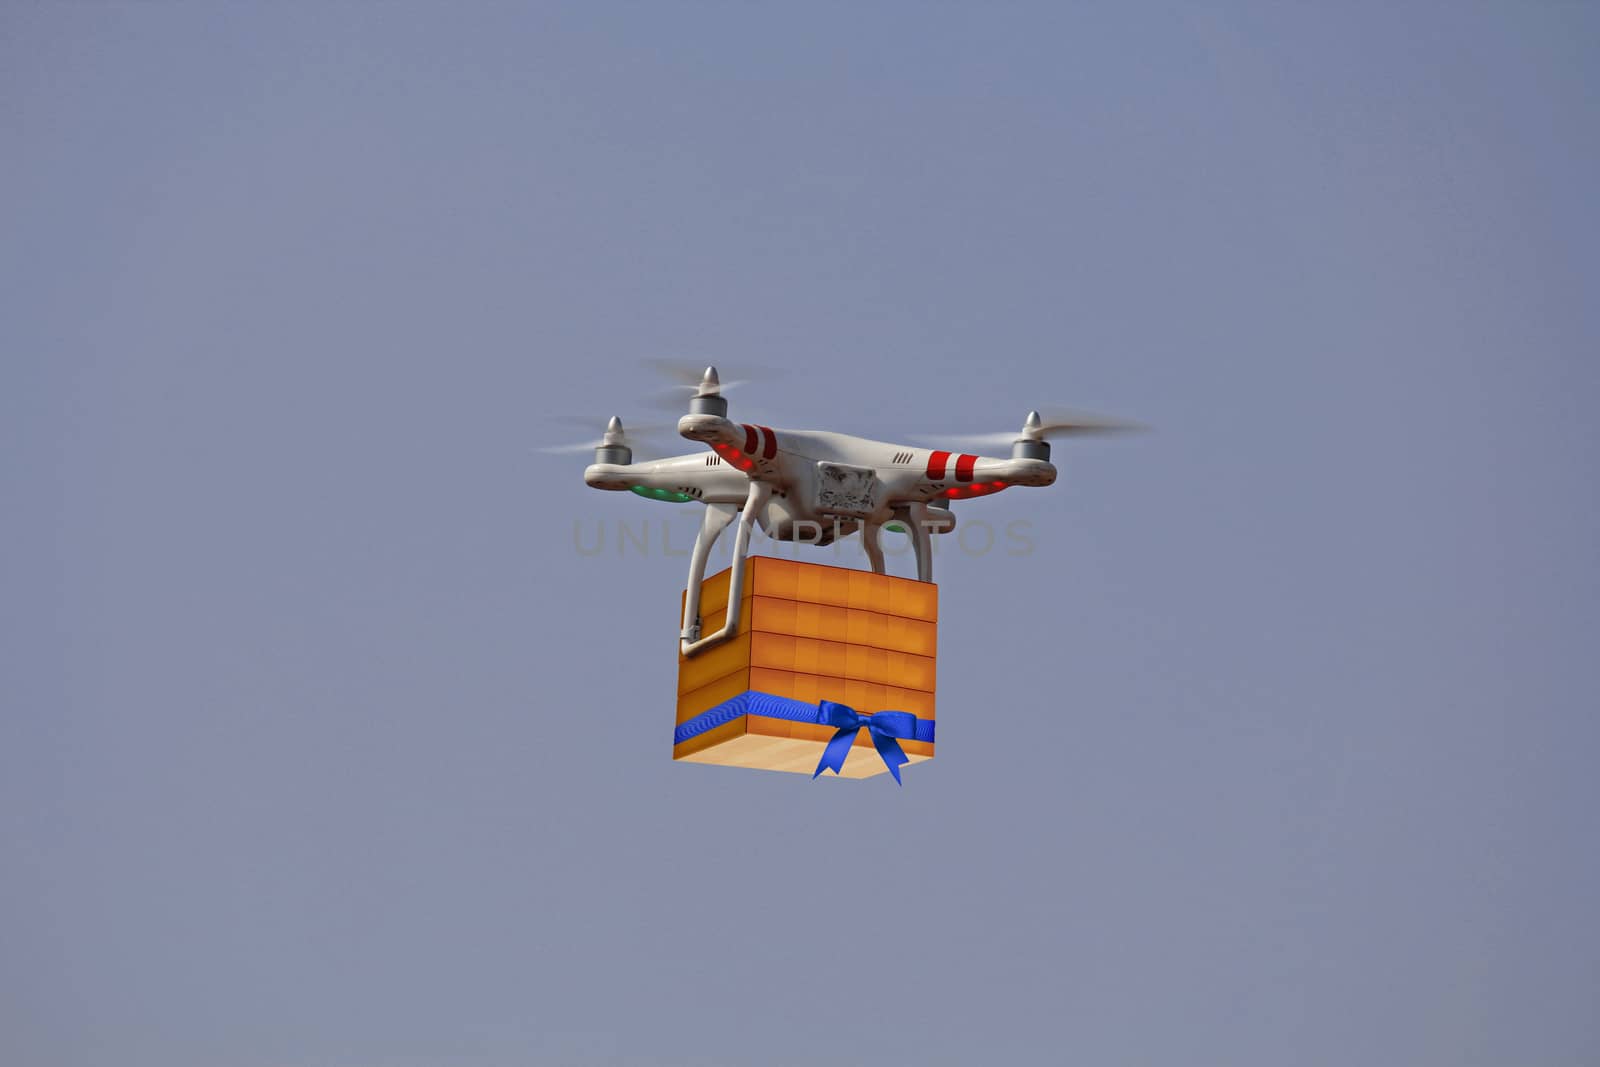 Air drone carrying carton box for fast delivery concept by yands